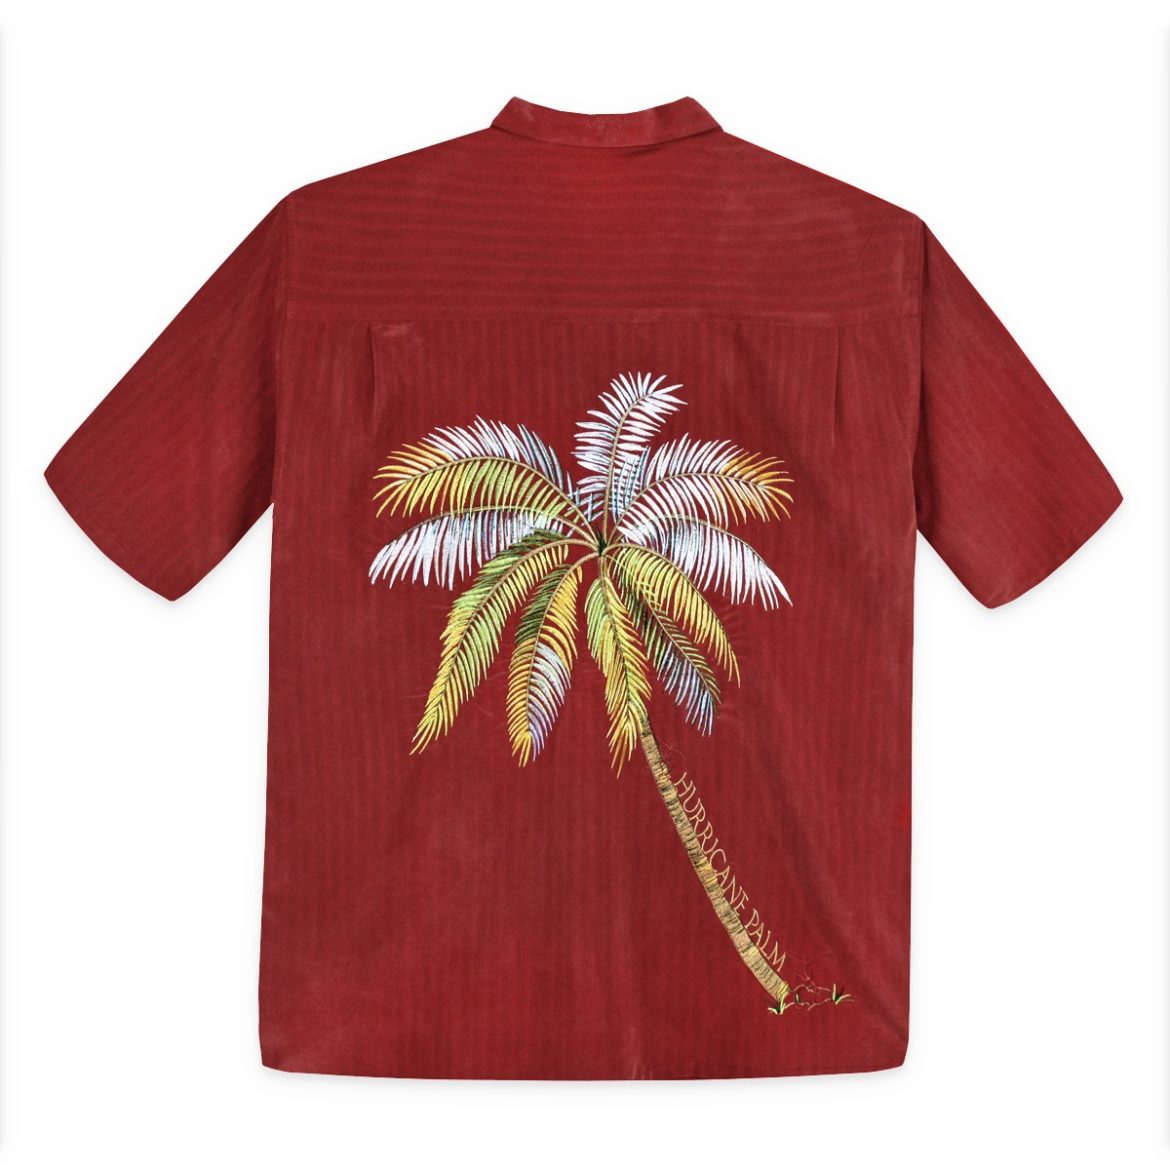 Bamboo Cay - Hurricane Palm - Limited Edition - Canyon - Back view